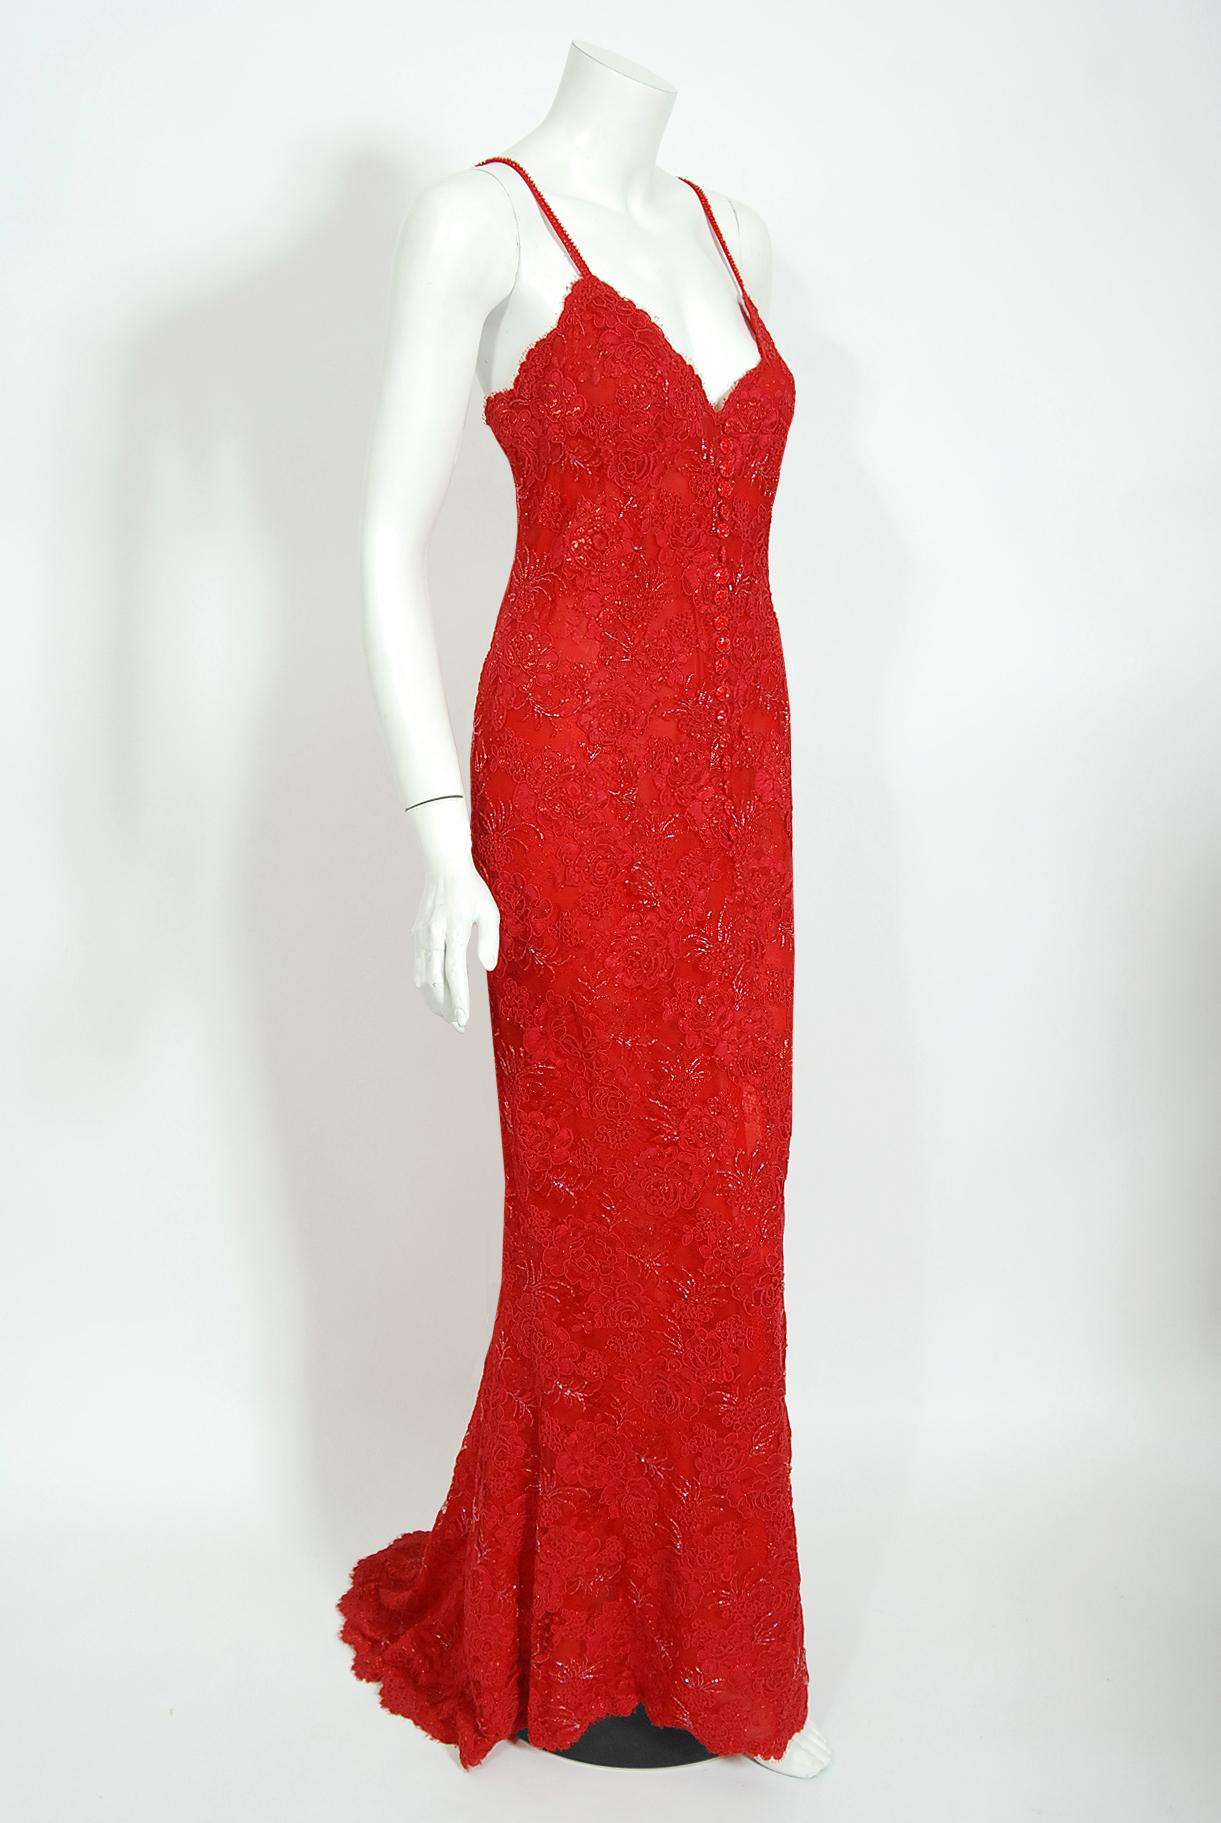 Women's Vintage 1996 Ungaro Haute Couture Red Beaded Floral Lace Hourglass Gown & Jacket